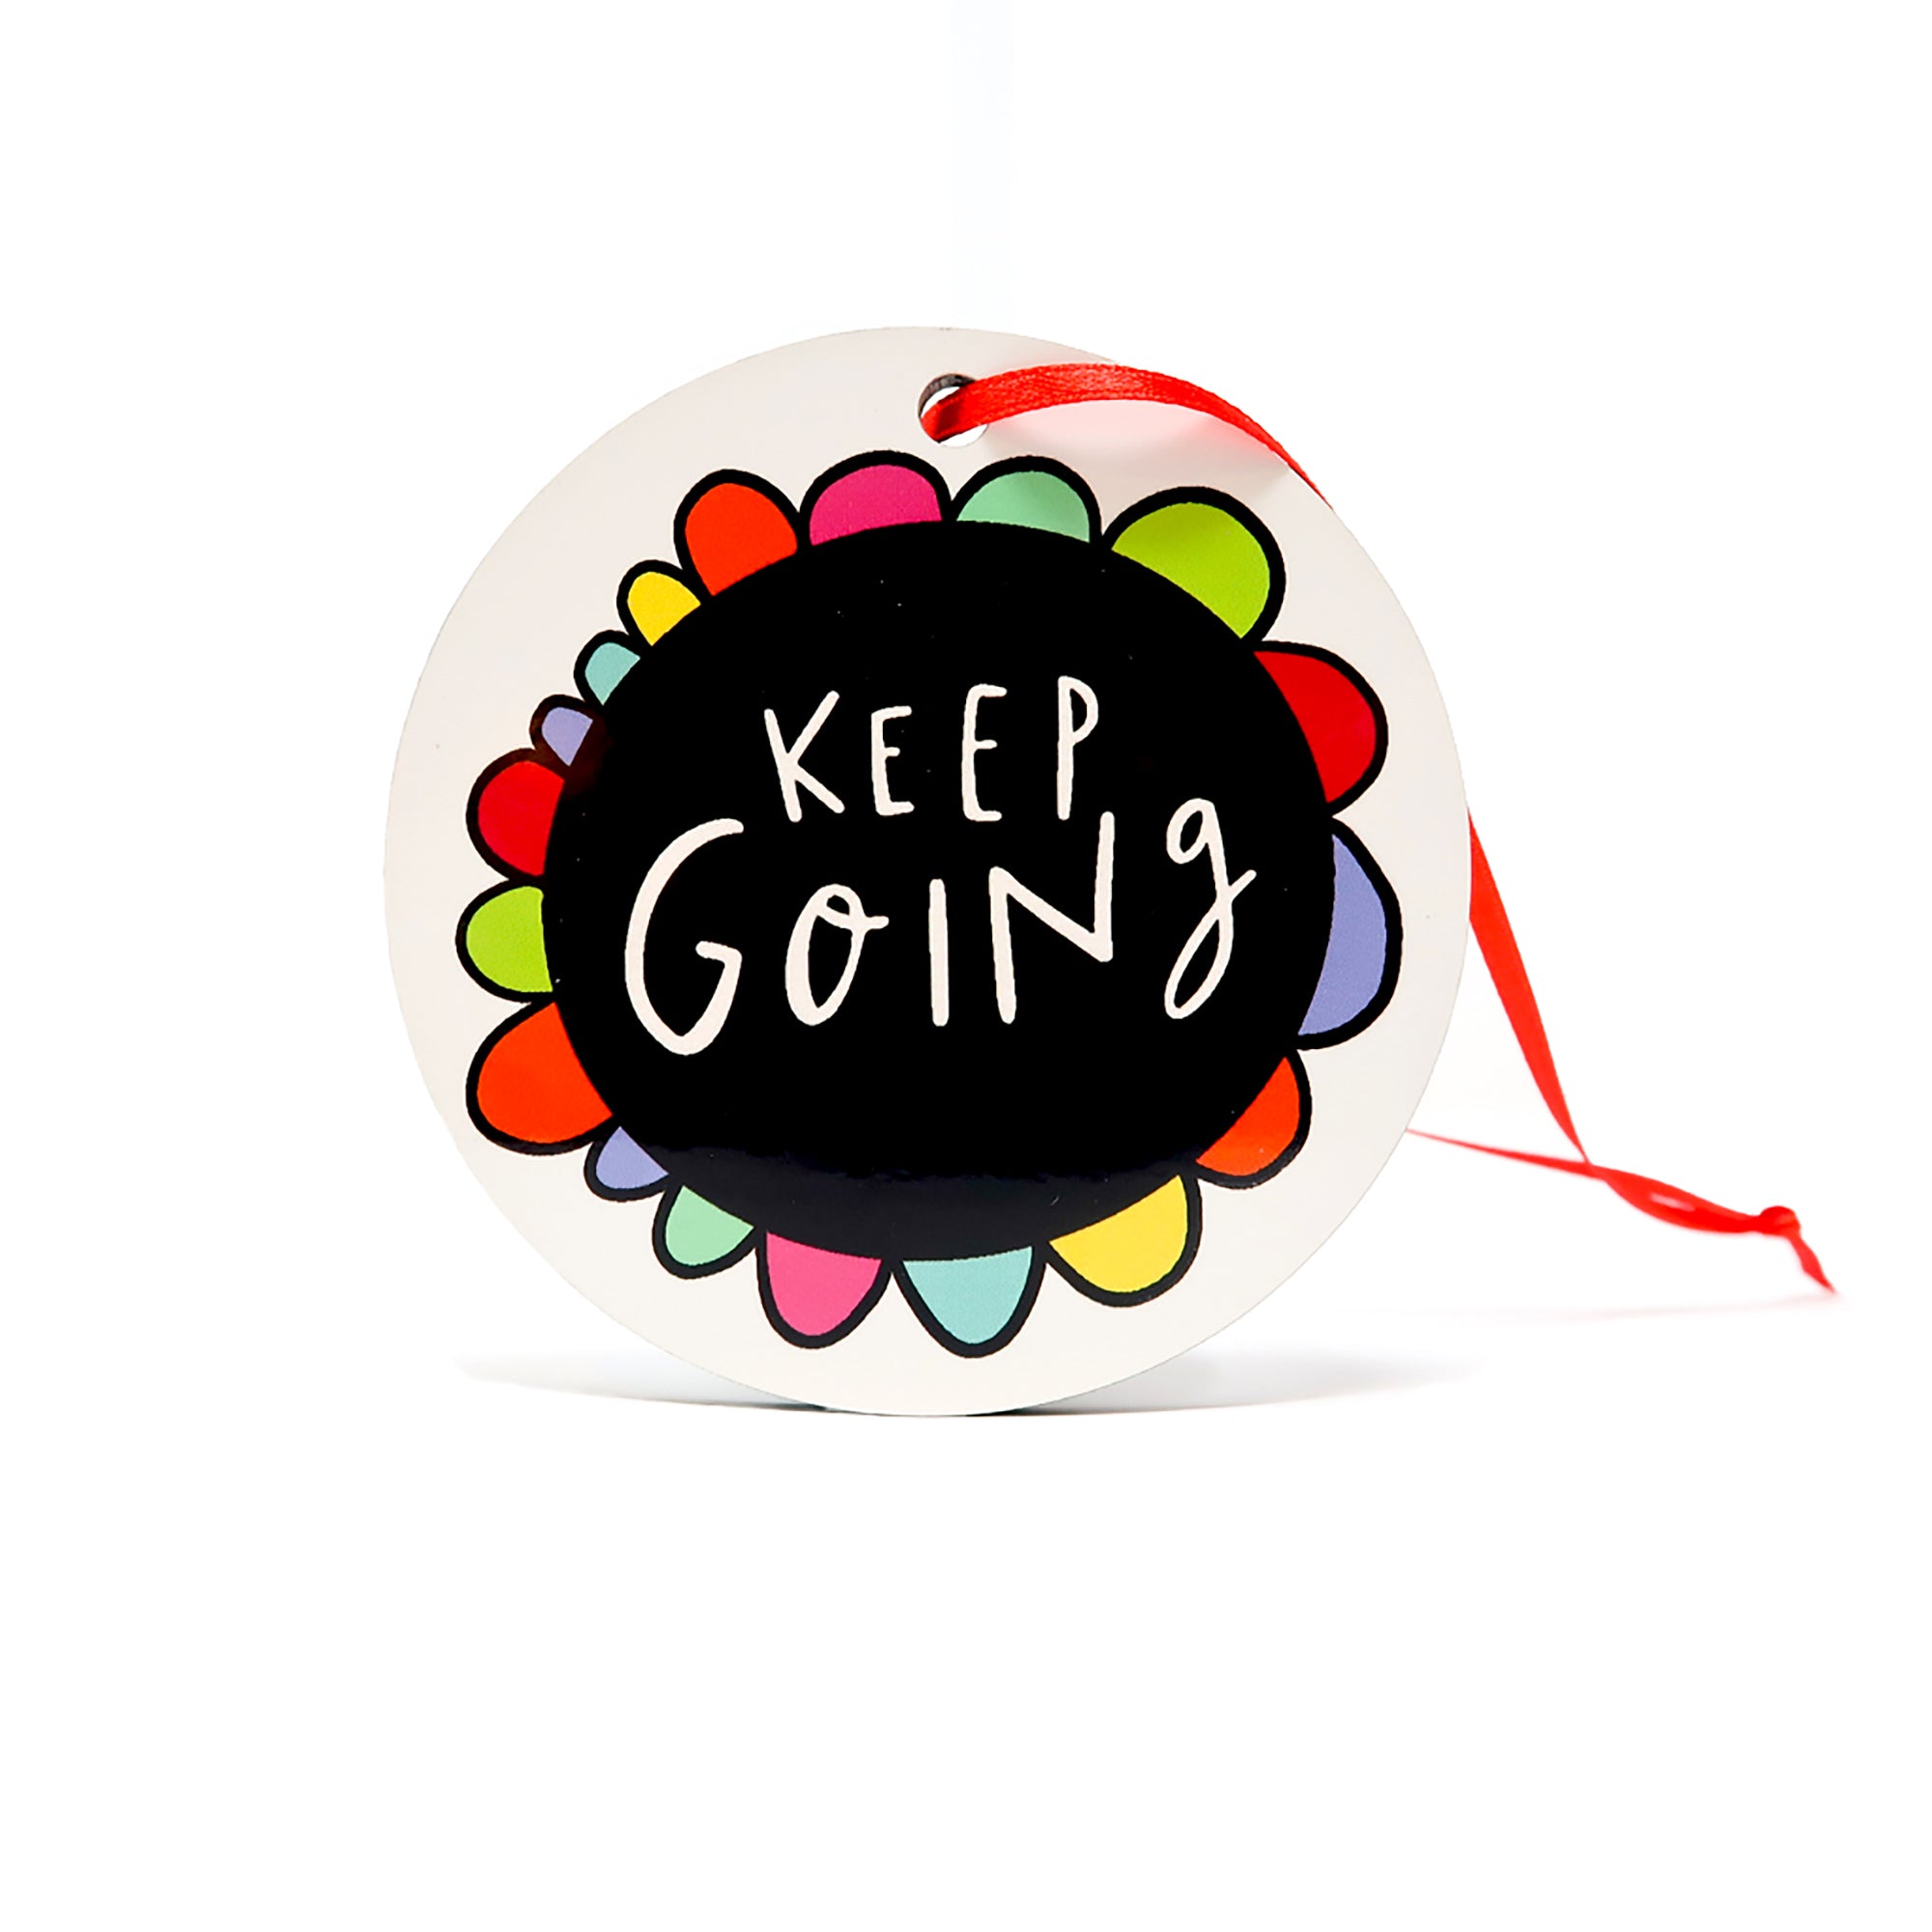 Keep going decoration